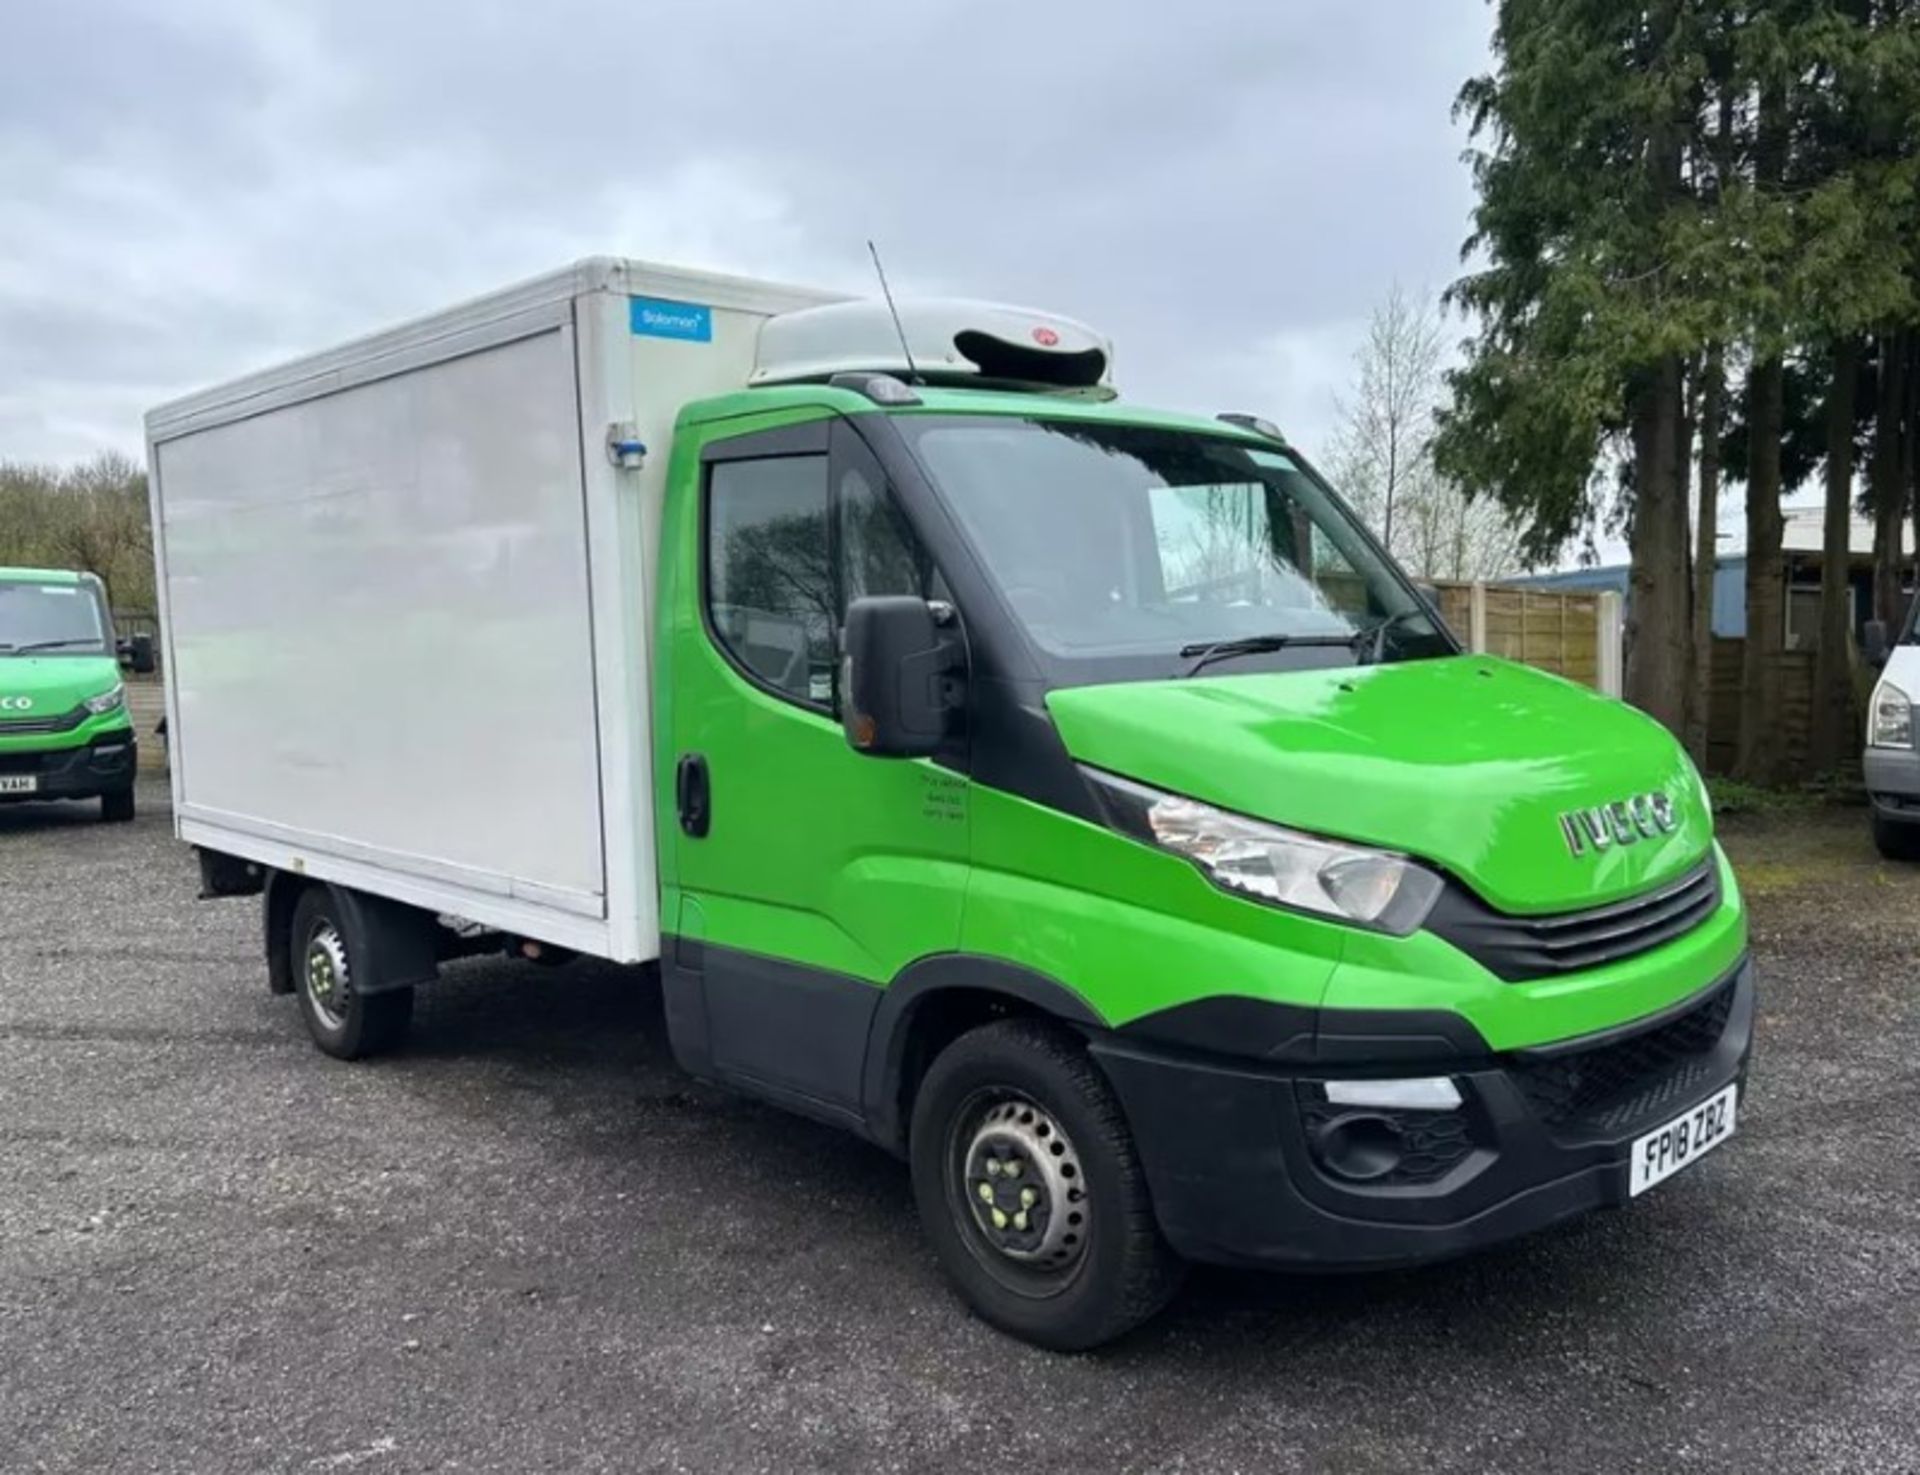 EXCEPTIONAL PERFORMANCE AND VERSATILITY: 2018 IVECO DAILY 35S12 CHASSIS CAB